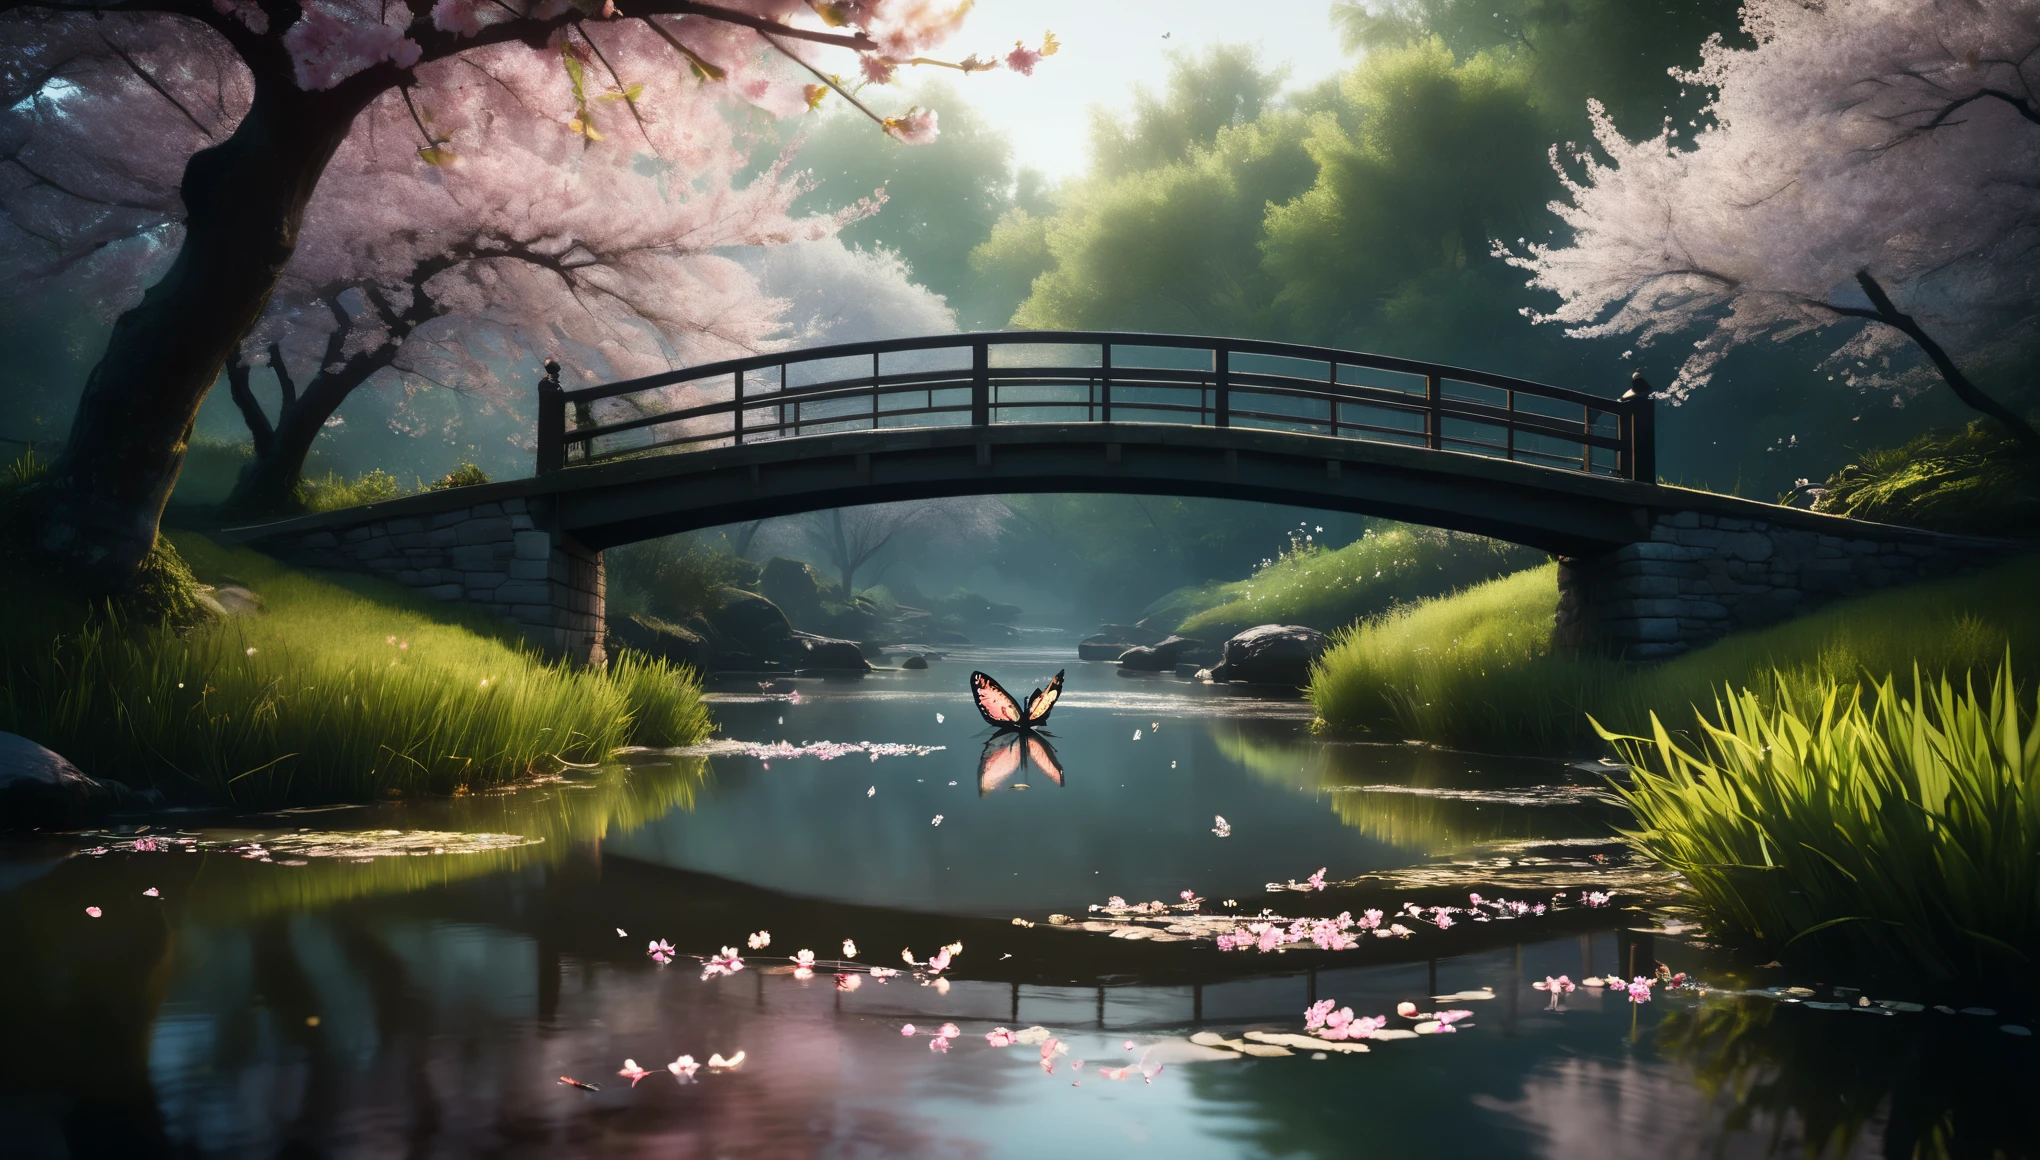 sharp focus,spring morning,bridge over the pond,clear water,flower,falling cherry blossom petals,glowing butterflies,fireflies,bioluminescent,Masterpiece,highest quality,photo,color grading,by lee jeffries,nikon d850,film stock photograph 4,kodak portra 400,f 1.6, rich colors,ultra-realistic,lifelike textures,dramatic lighting,unreal engine,cinestill 800